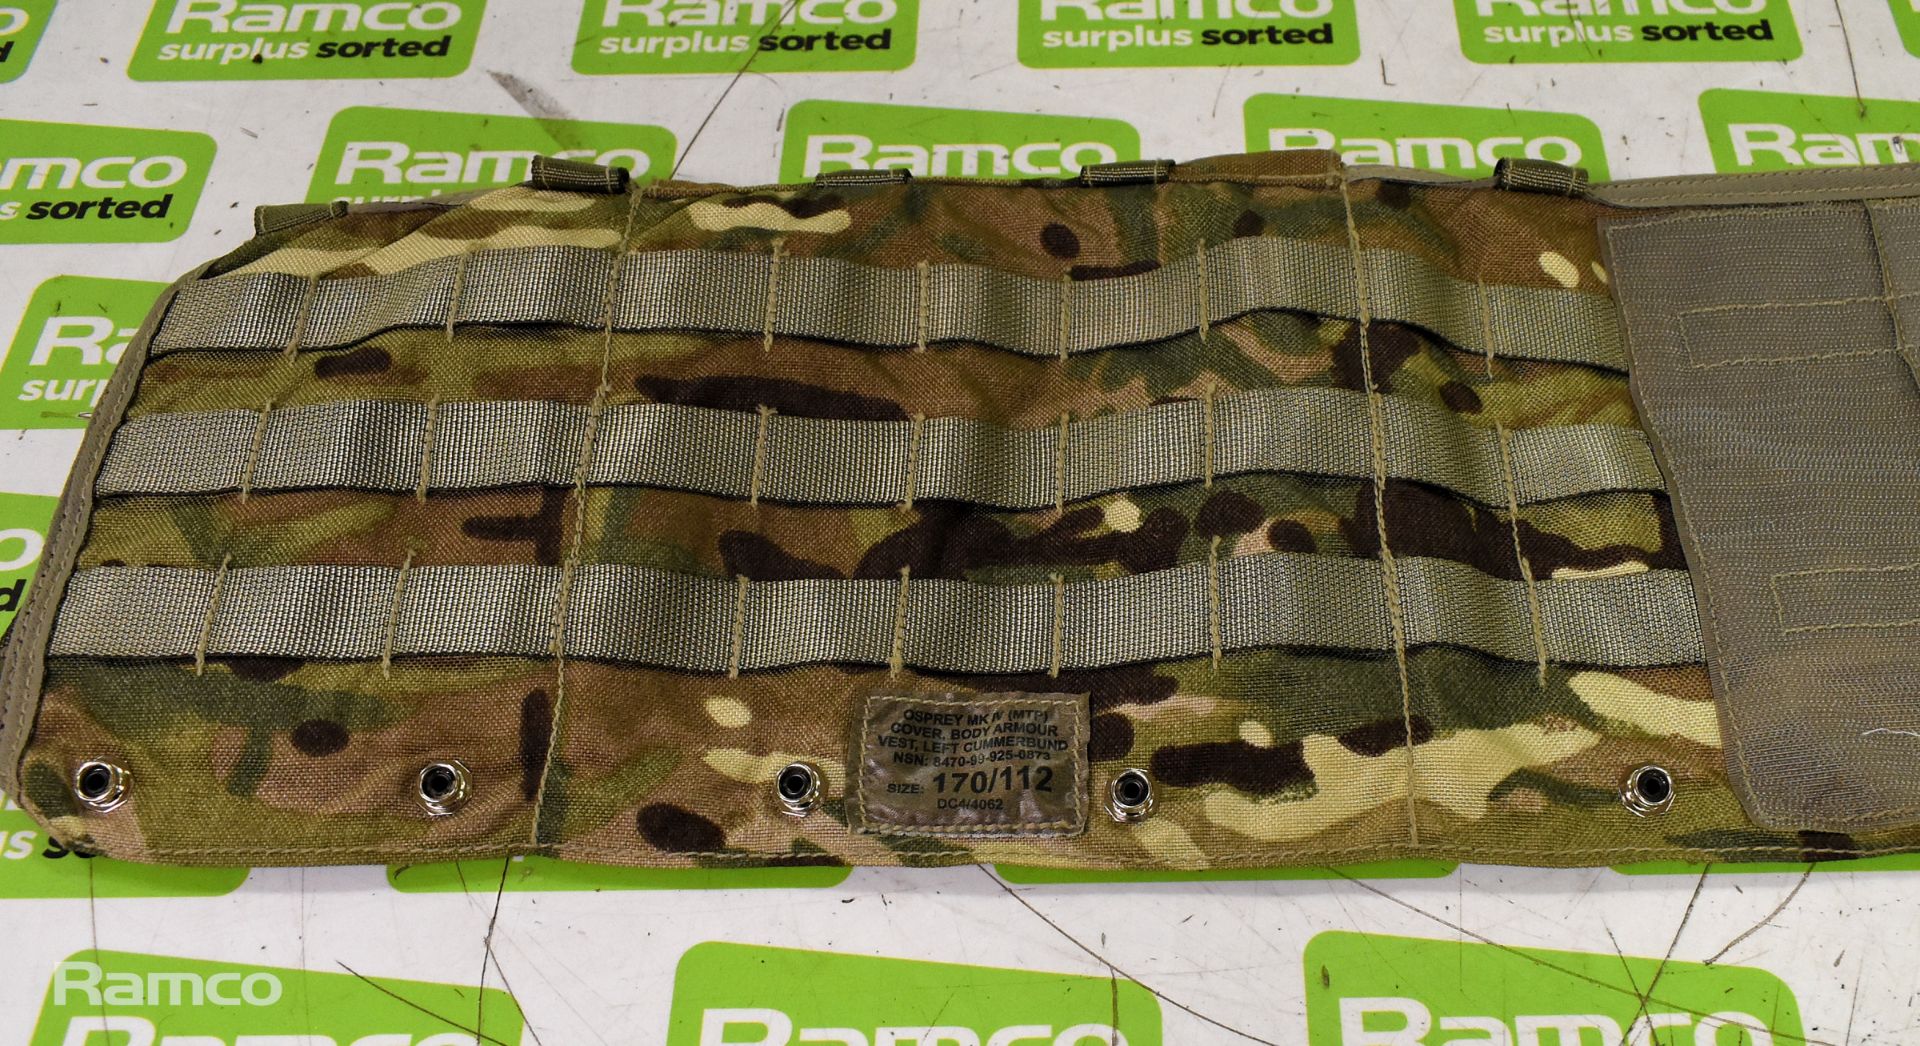 14x British Army MTP Osprey MK IV cummerbund vest body armour covers - mixed grades and sizes - Image 2 of 5